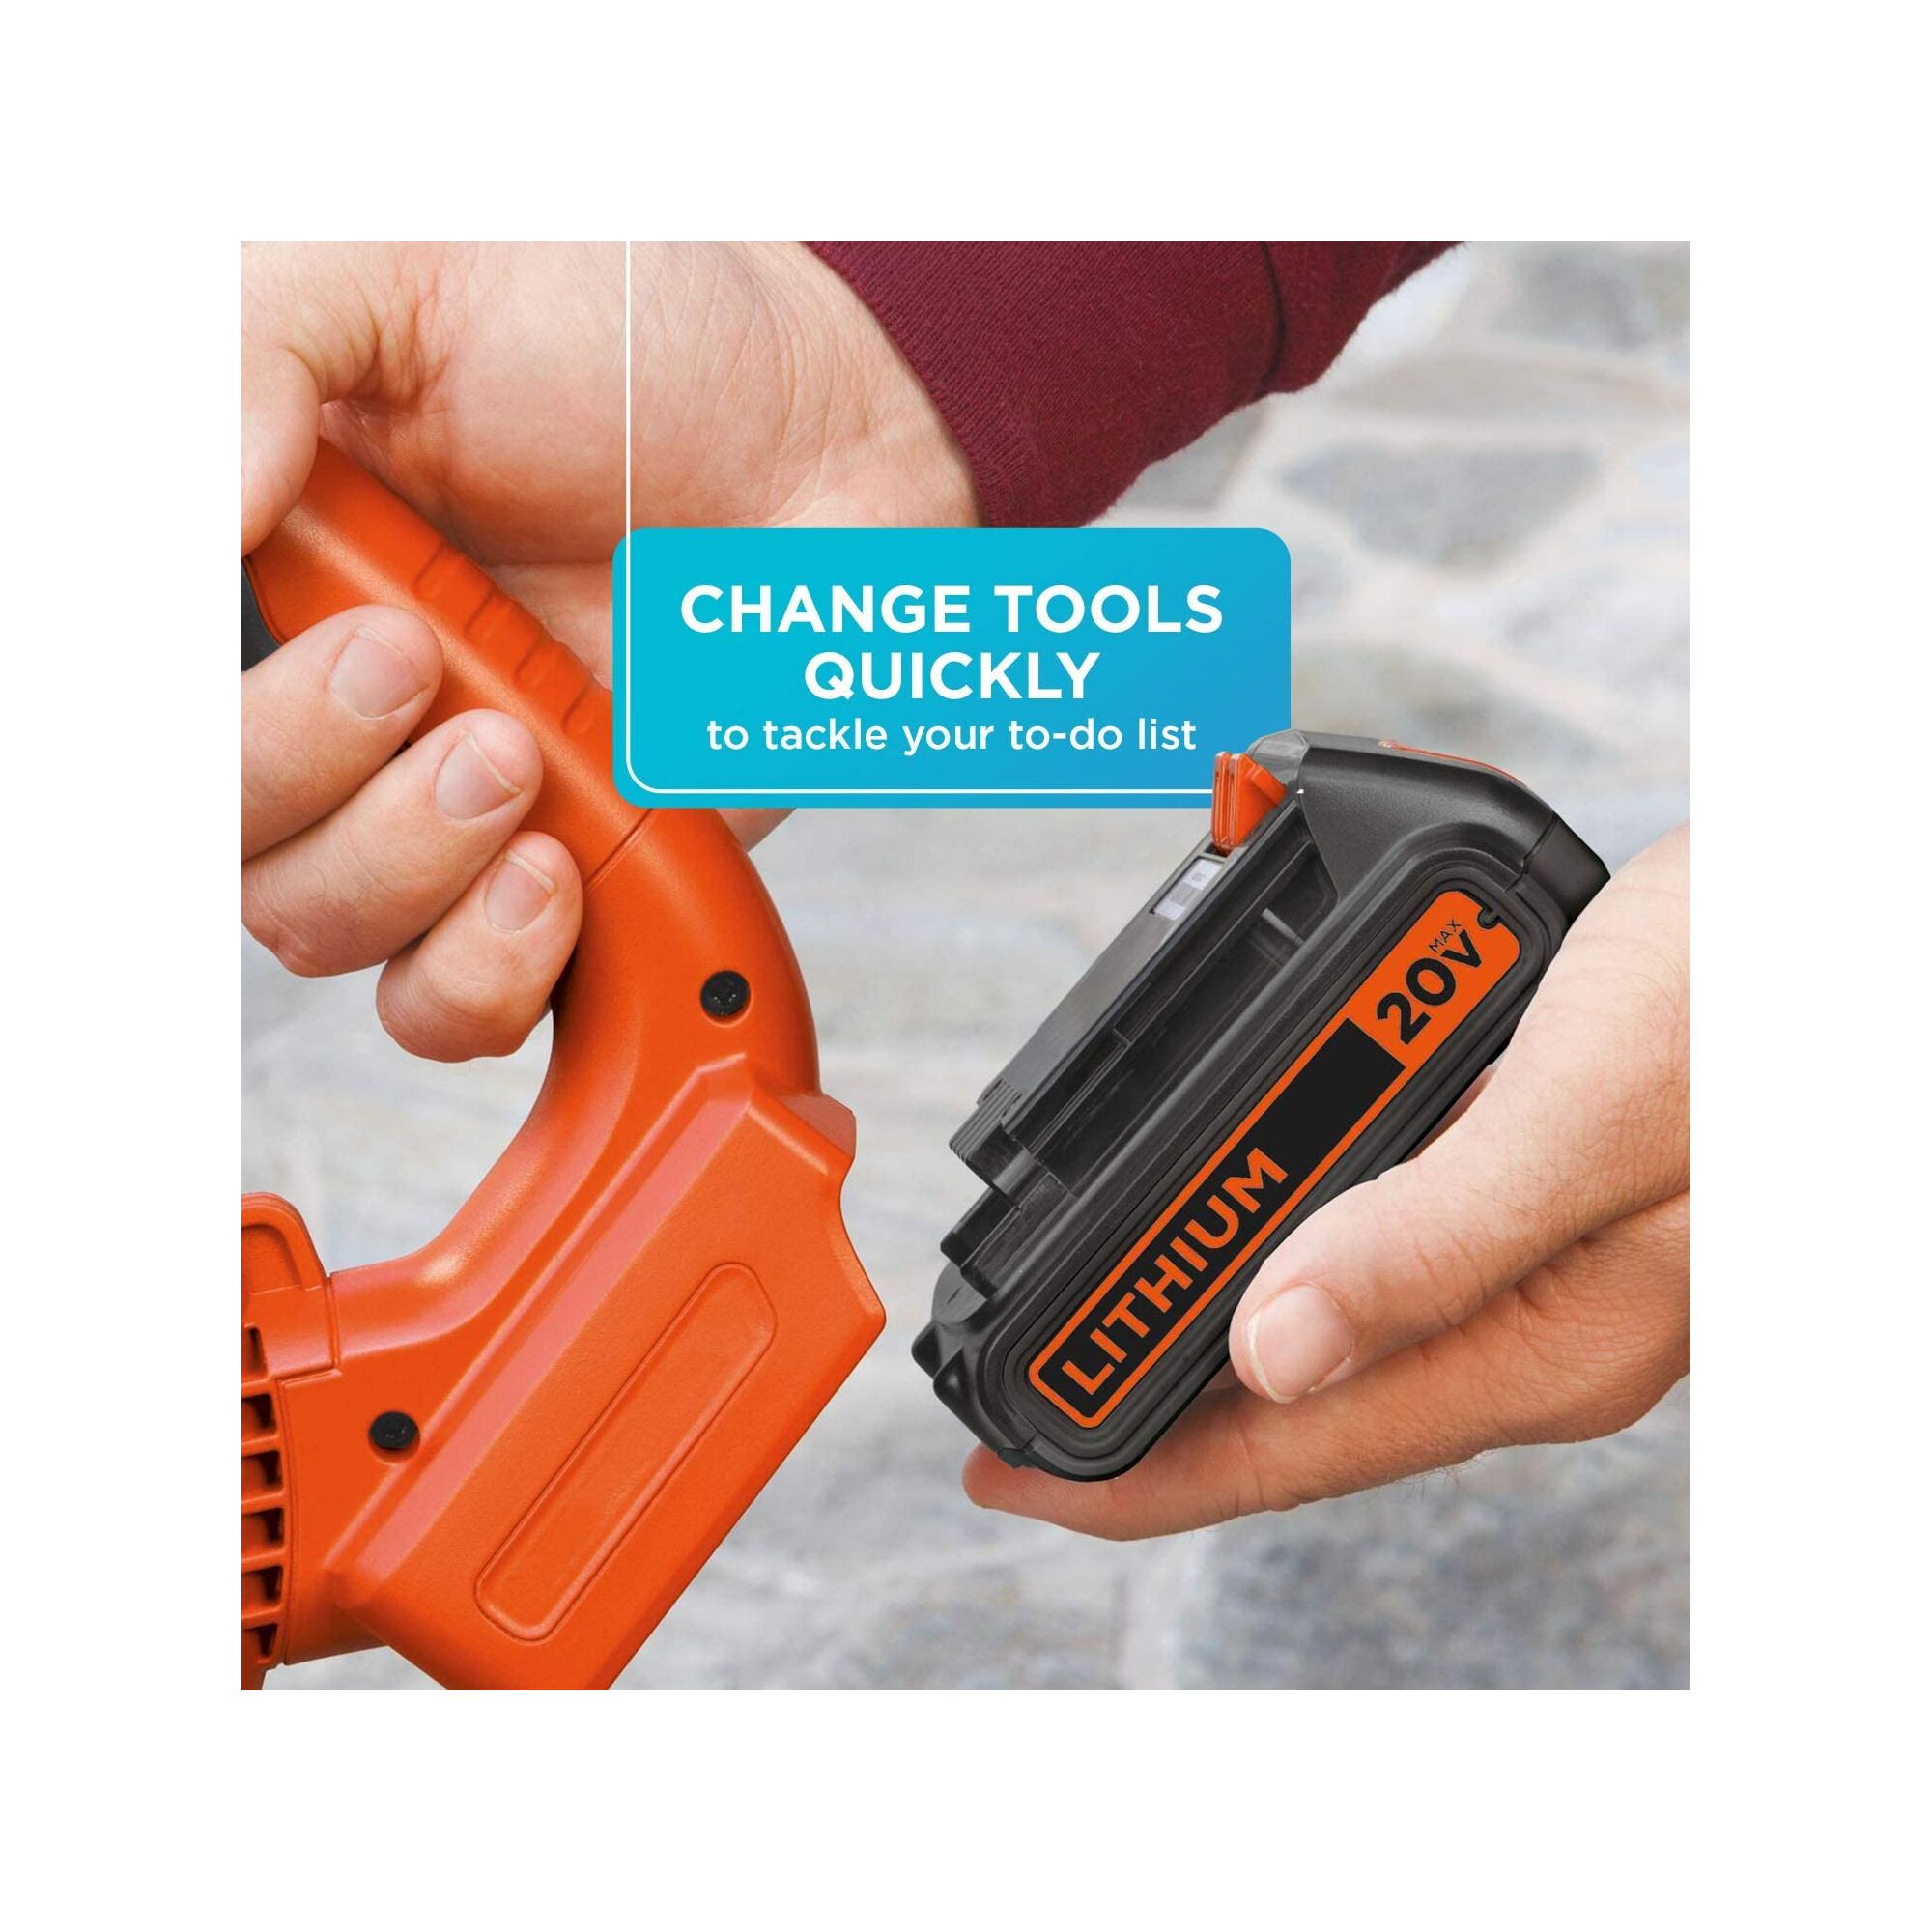 Person installing 20V Max battery onto a tool